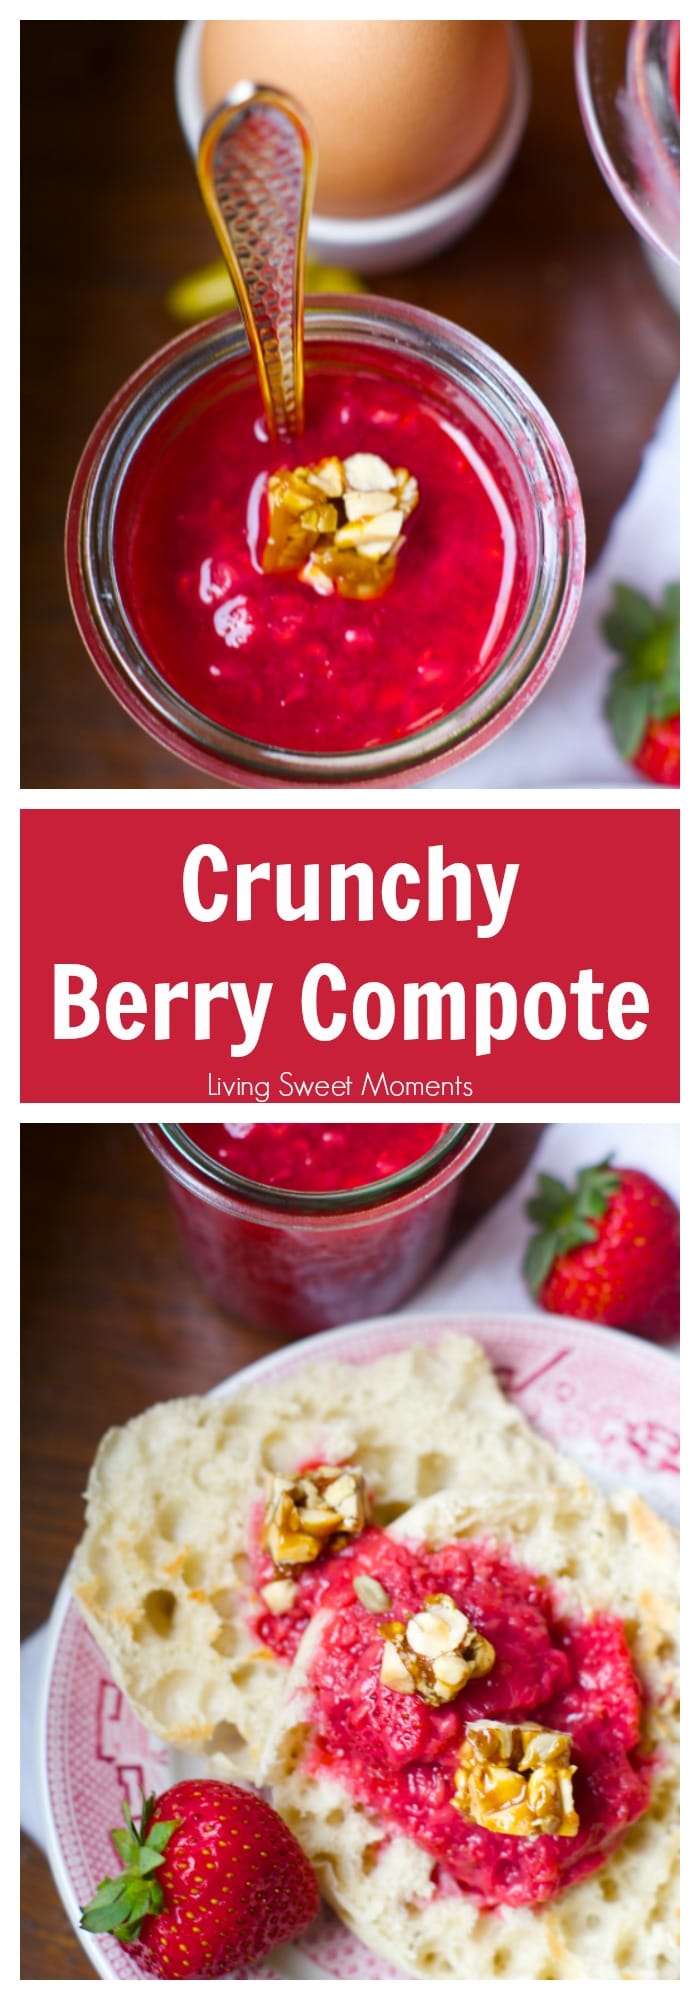 Berry Compote: this simple 3 ingredient compote is perfect to serve with toast, cake, pancakes and even yogurt parfaits in the morning. Delicious and easy!